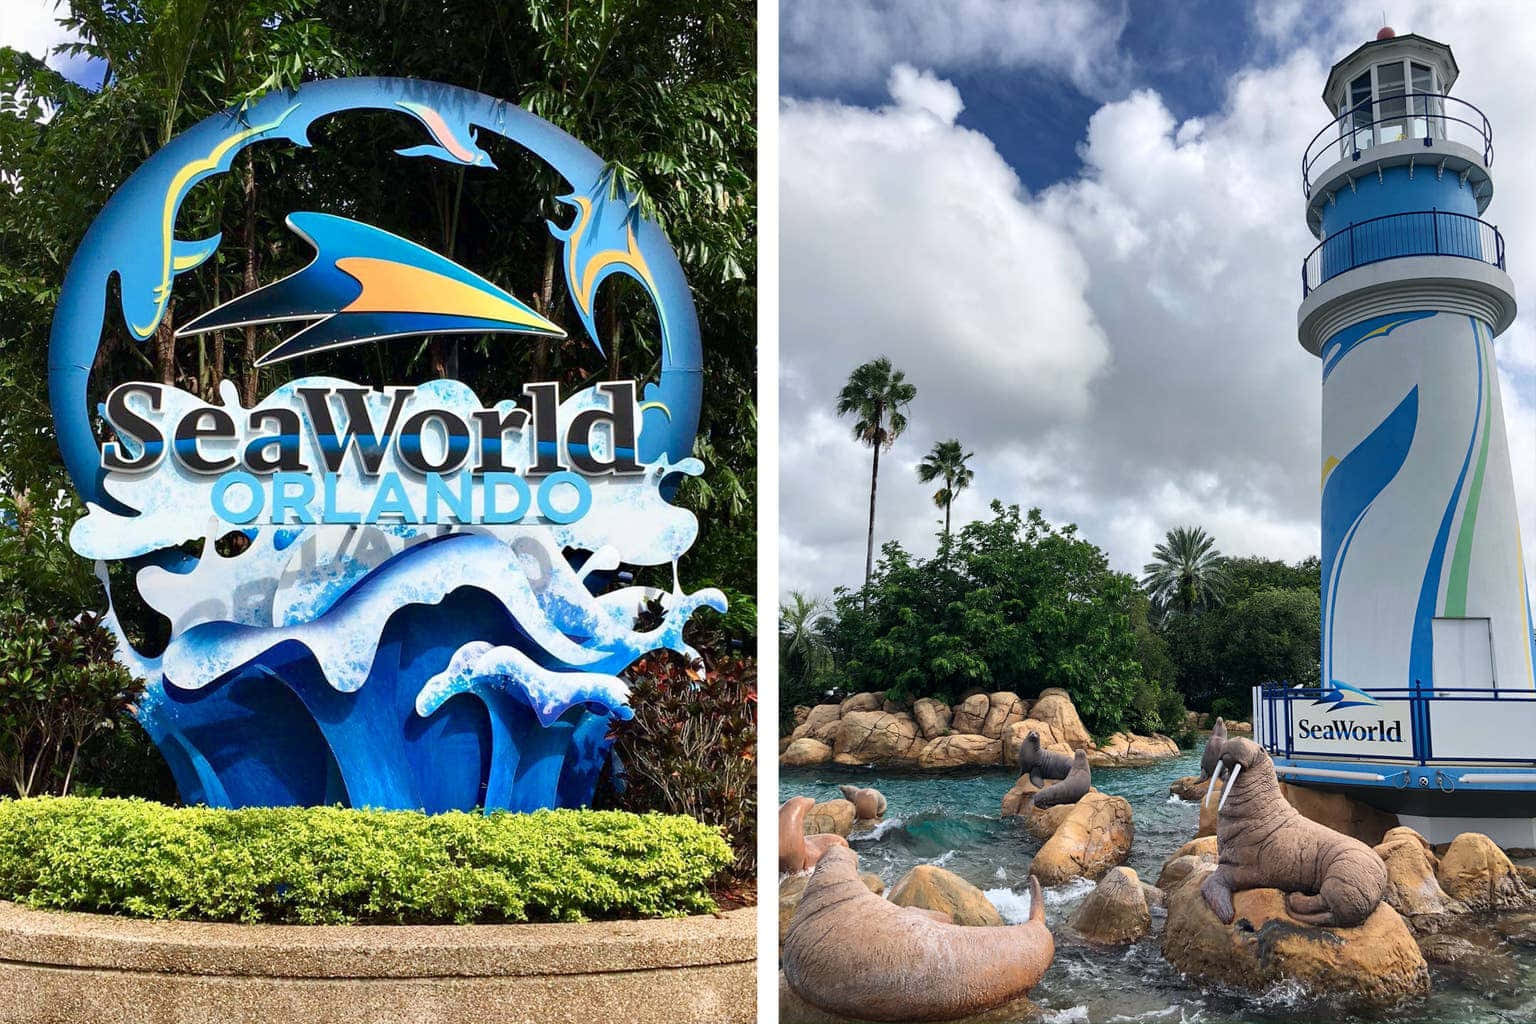 Enjoy an unforgettable day filled with fun activities and magical sights at SeaWorld!